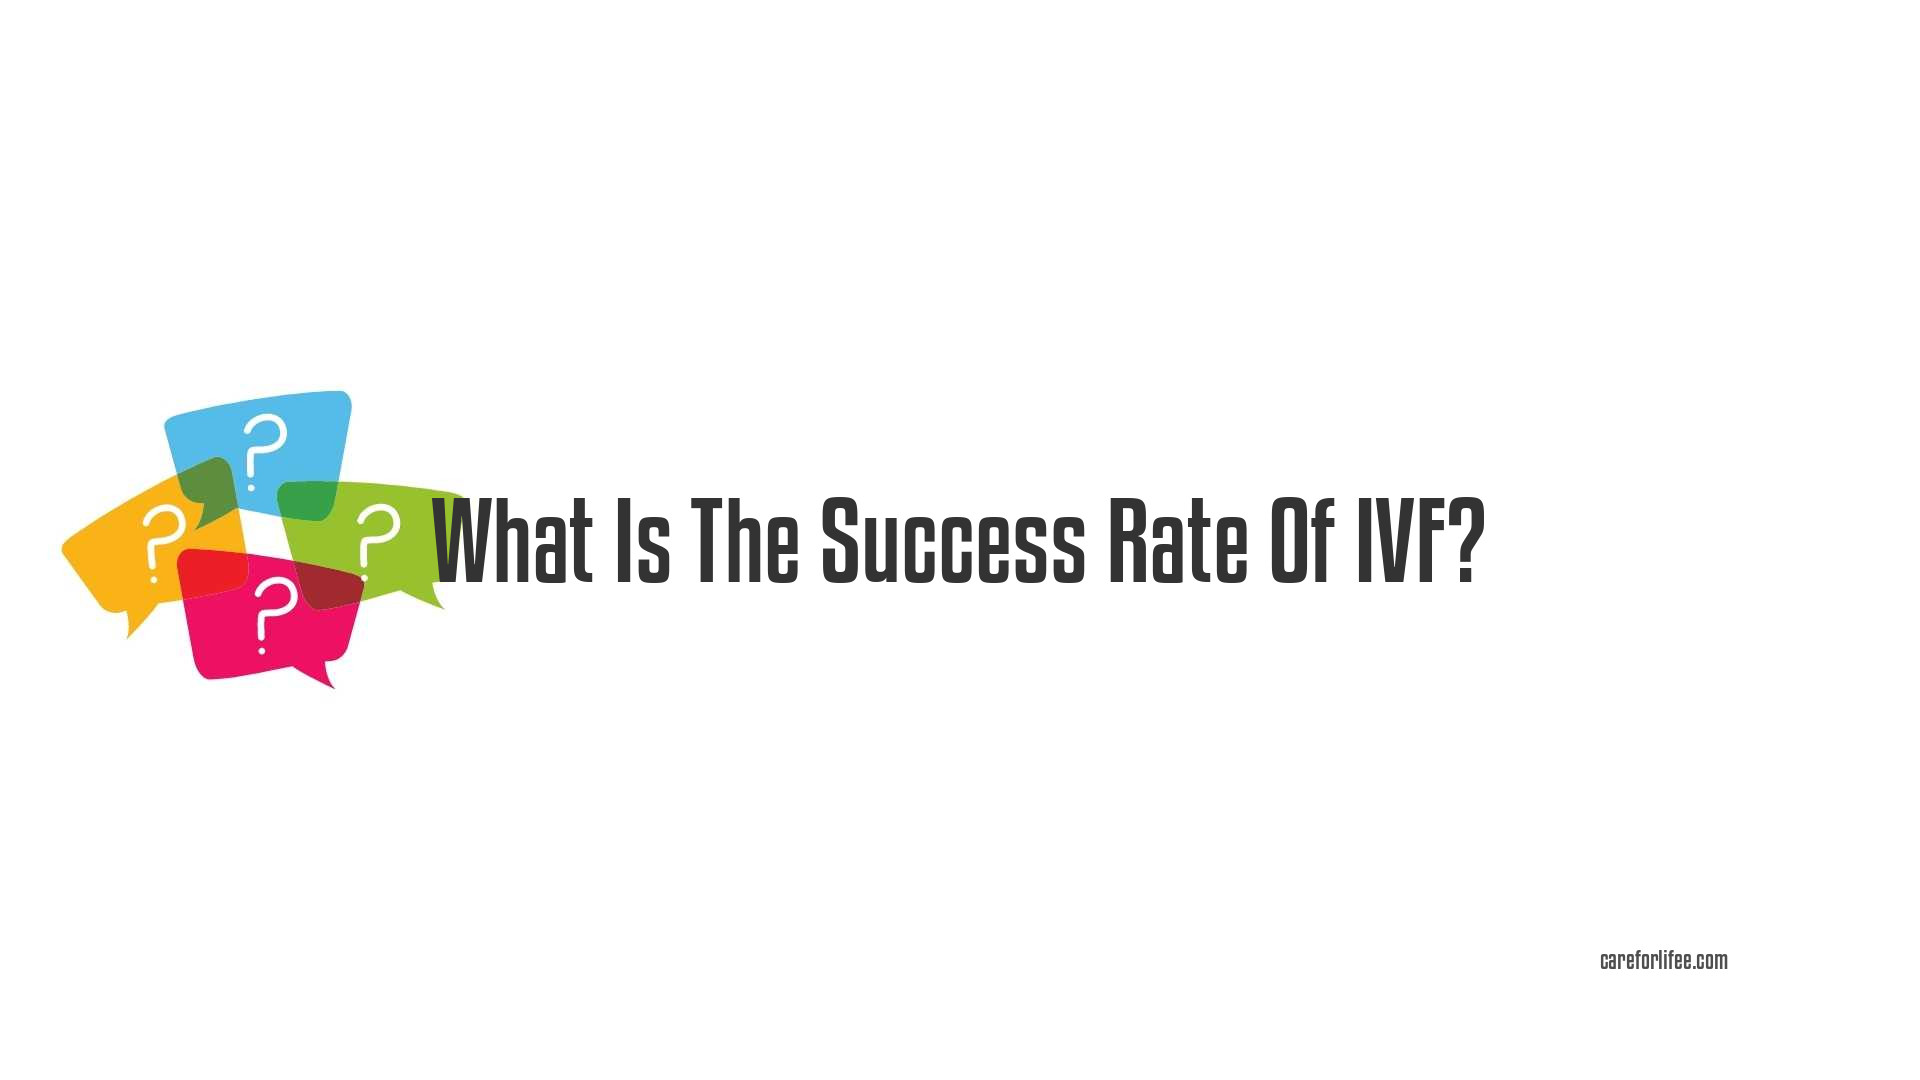 What Is The Success Rate Of IVF?